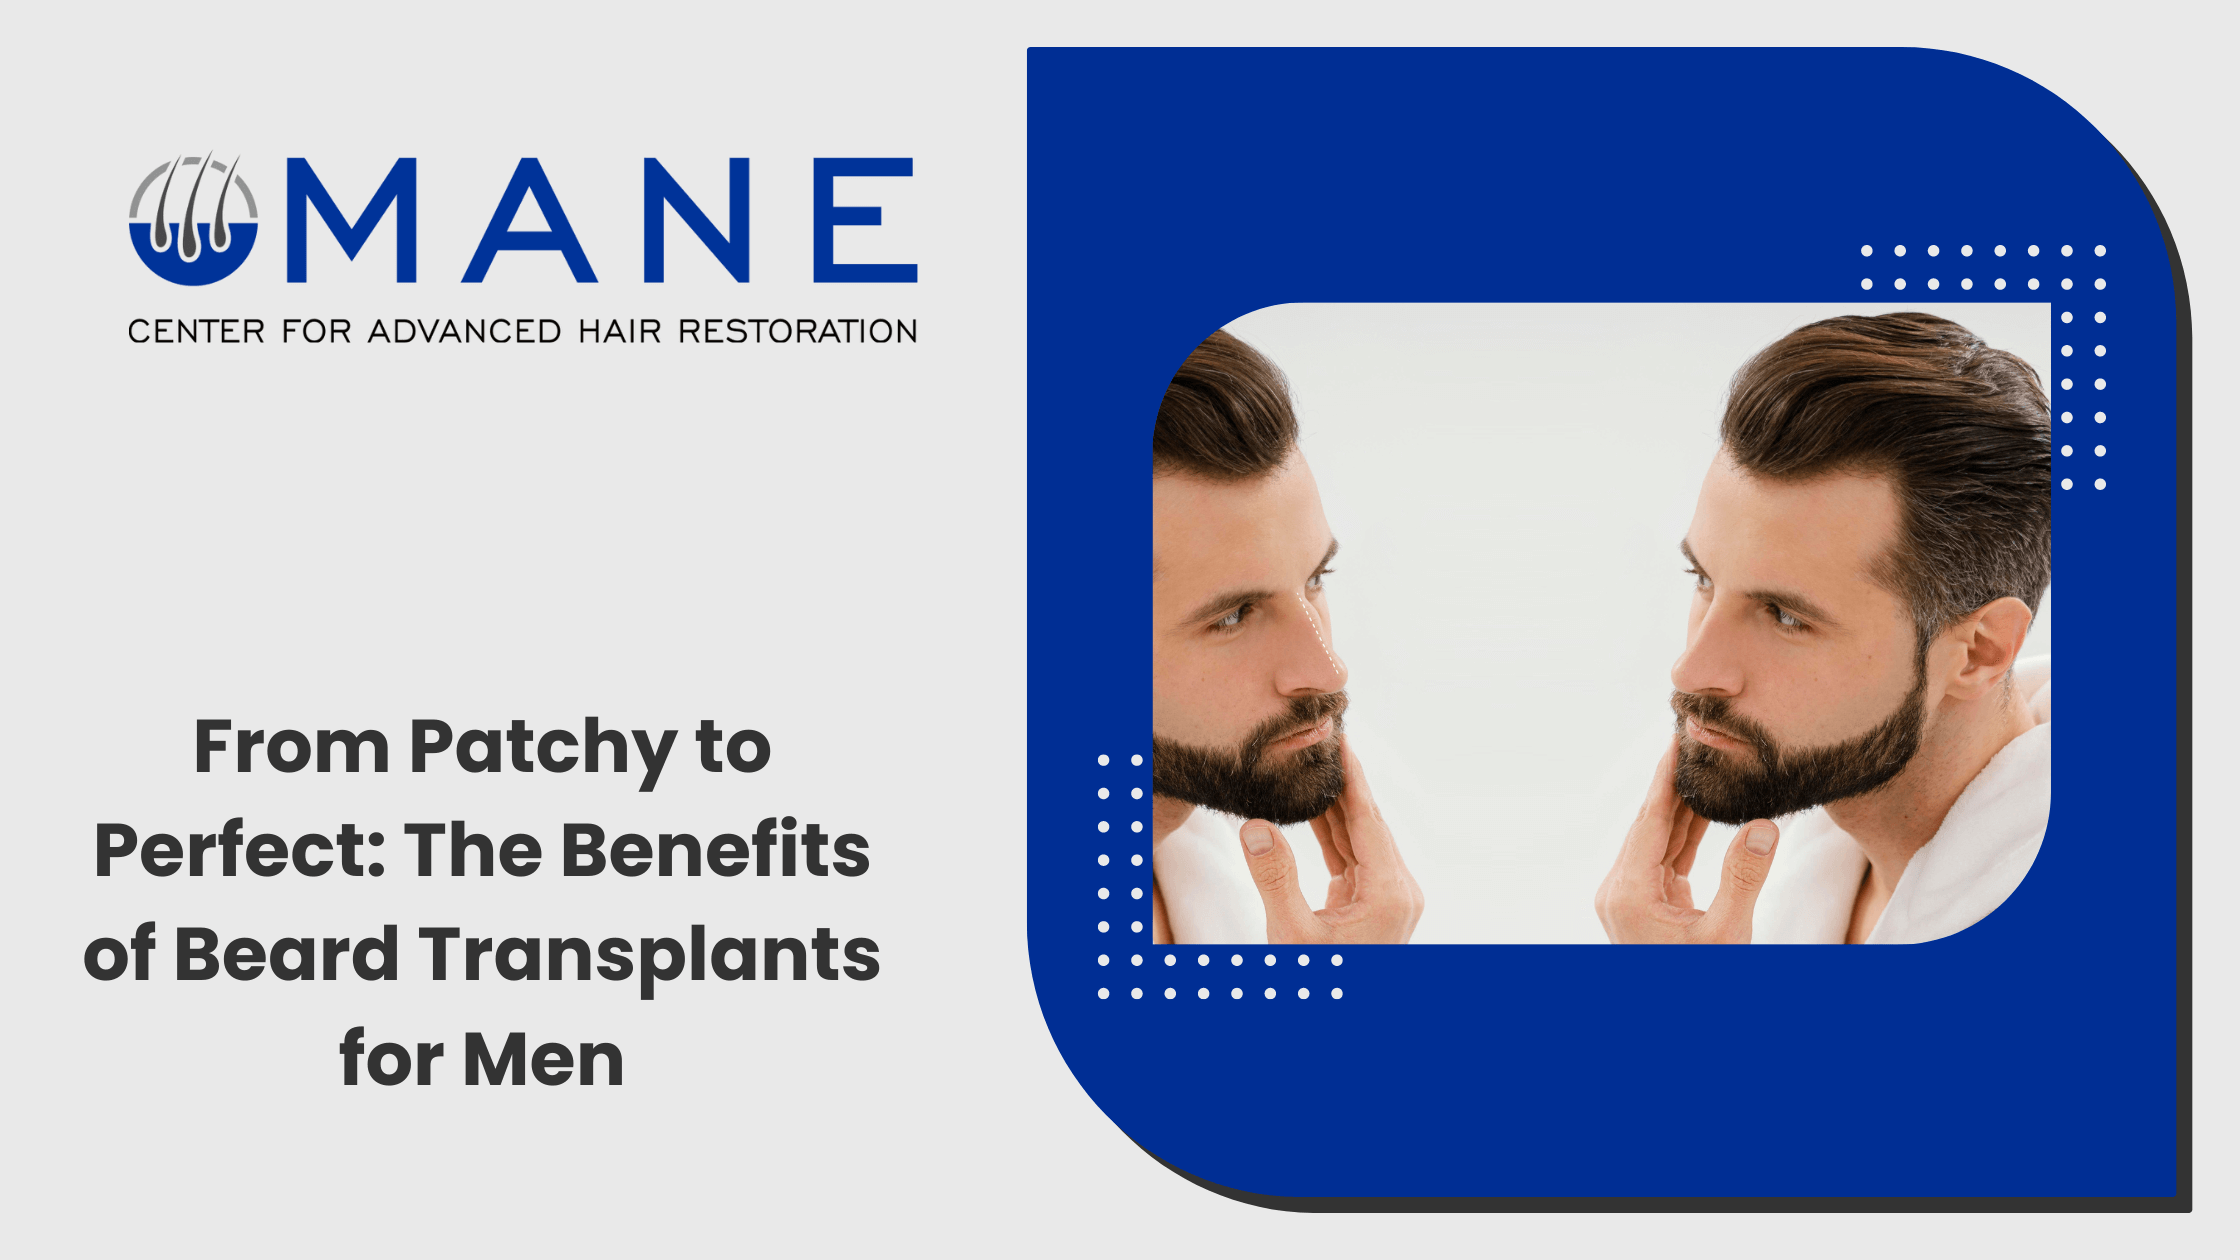 From Patchy to Perfect: The Benefits of Beard Transplants for Men